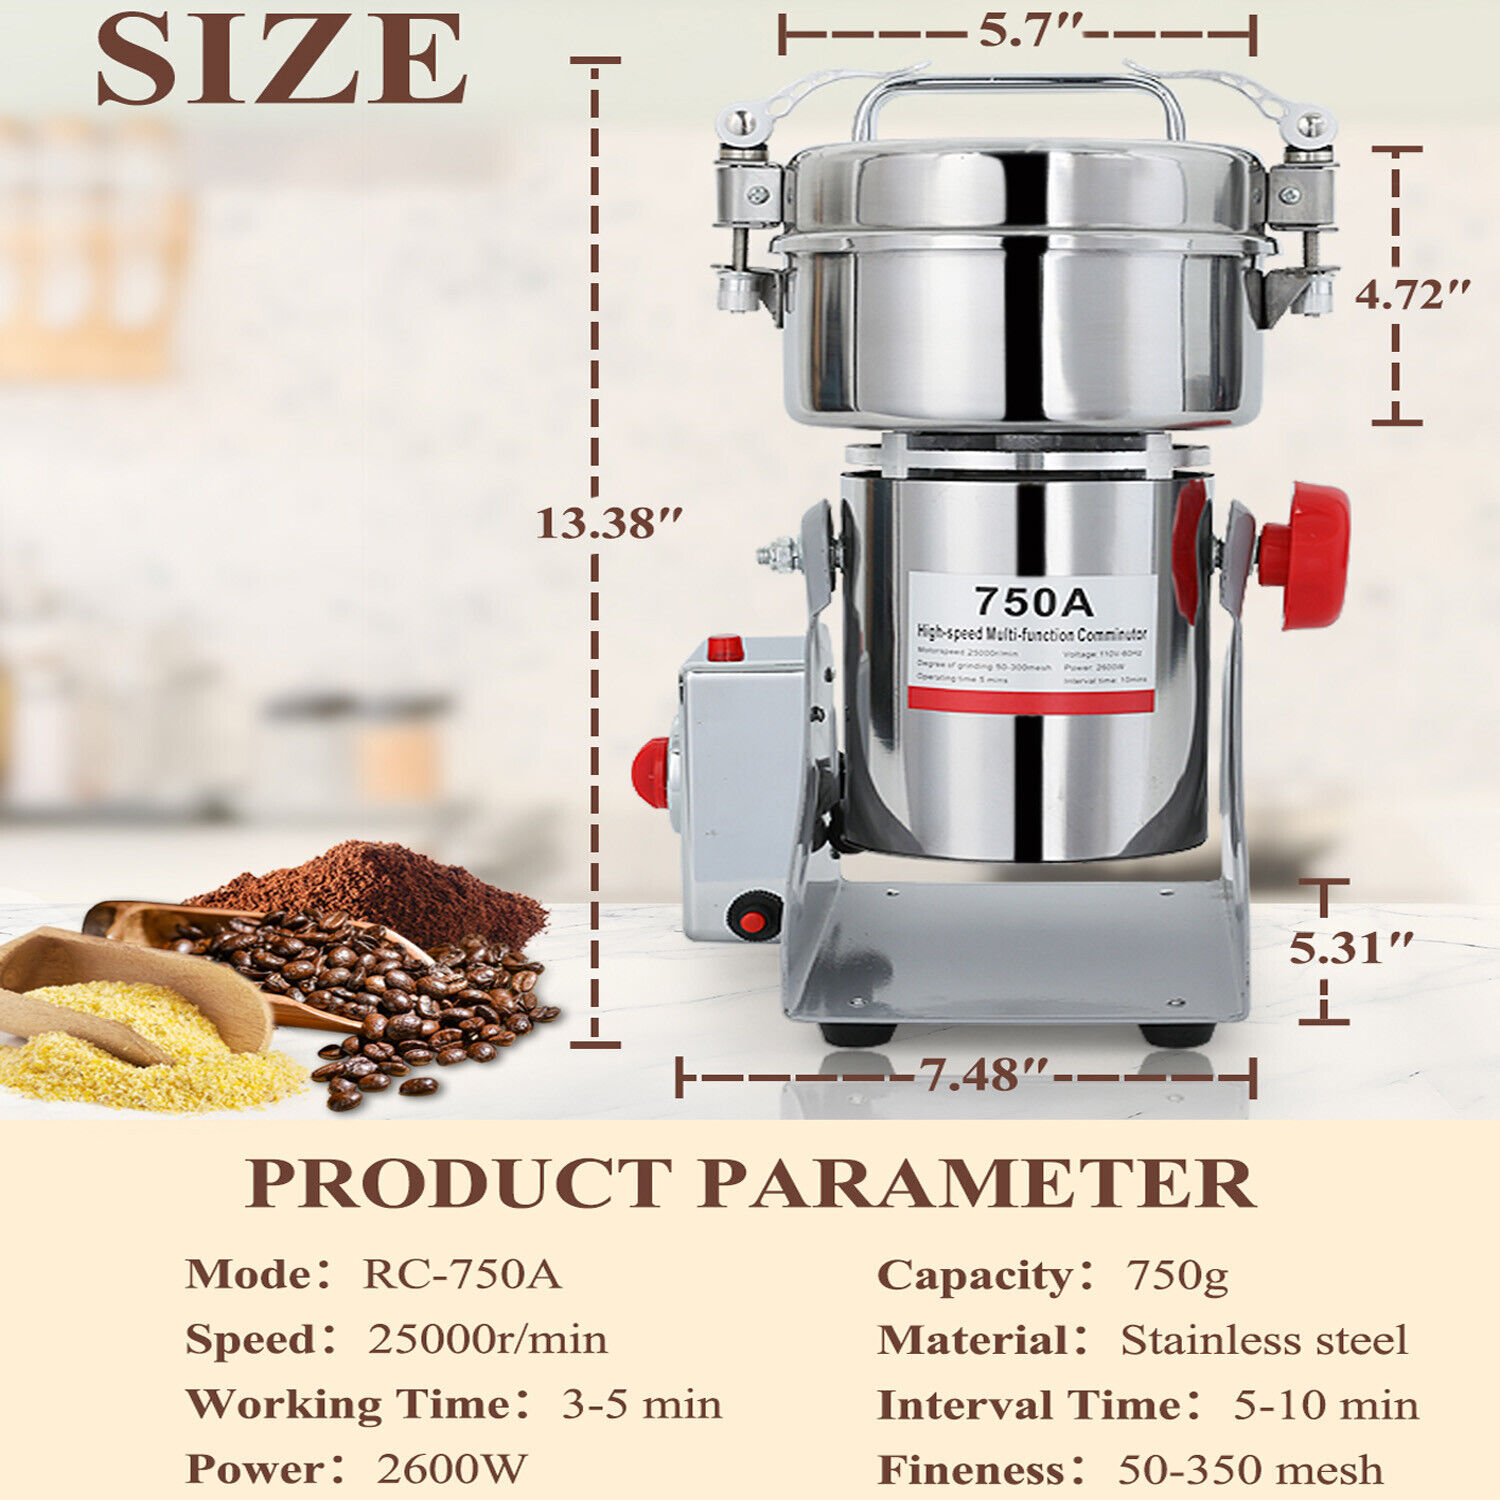 1000g/2500g Commercial Spice Grinder Electric Grain Mill Dry Grinder Machine